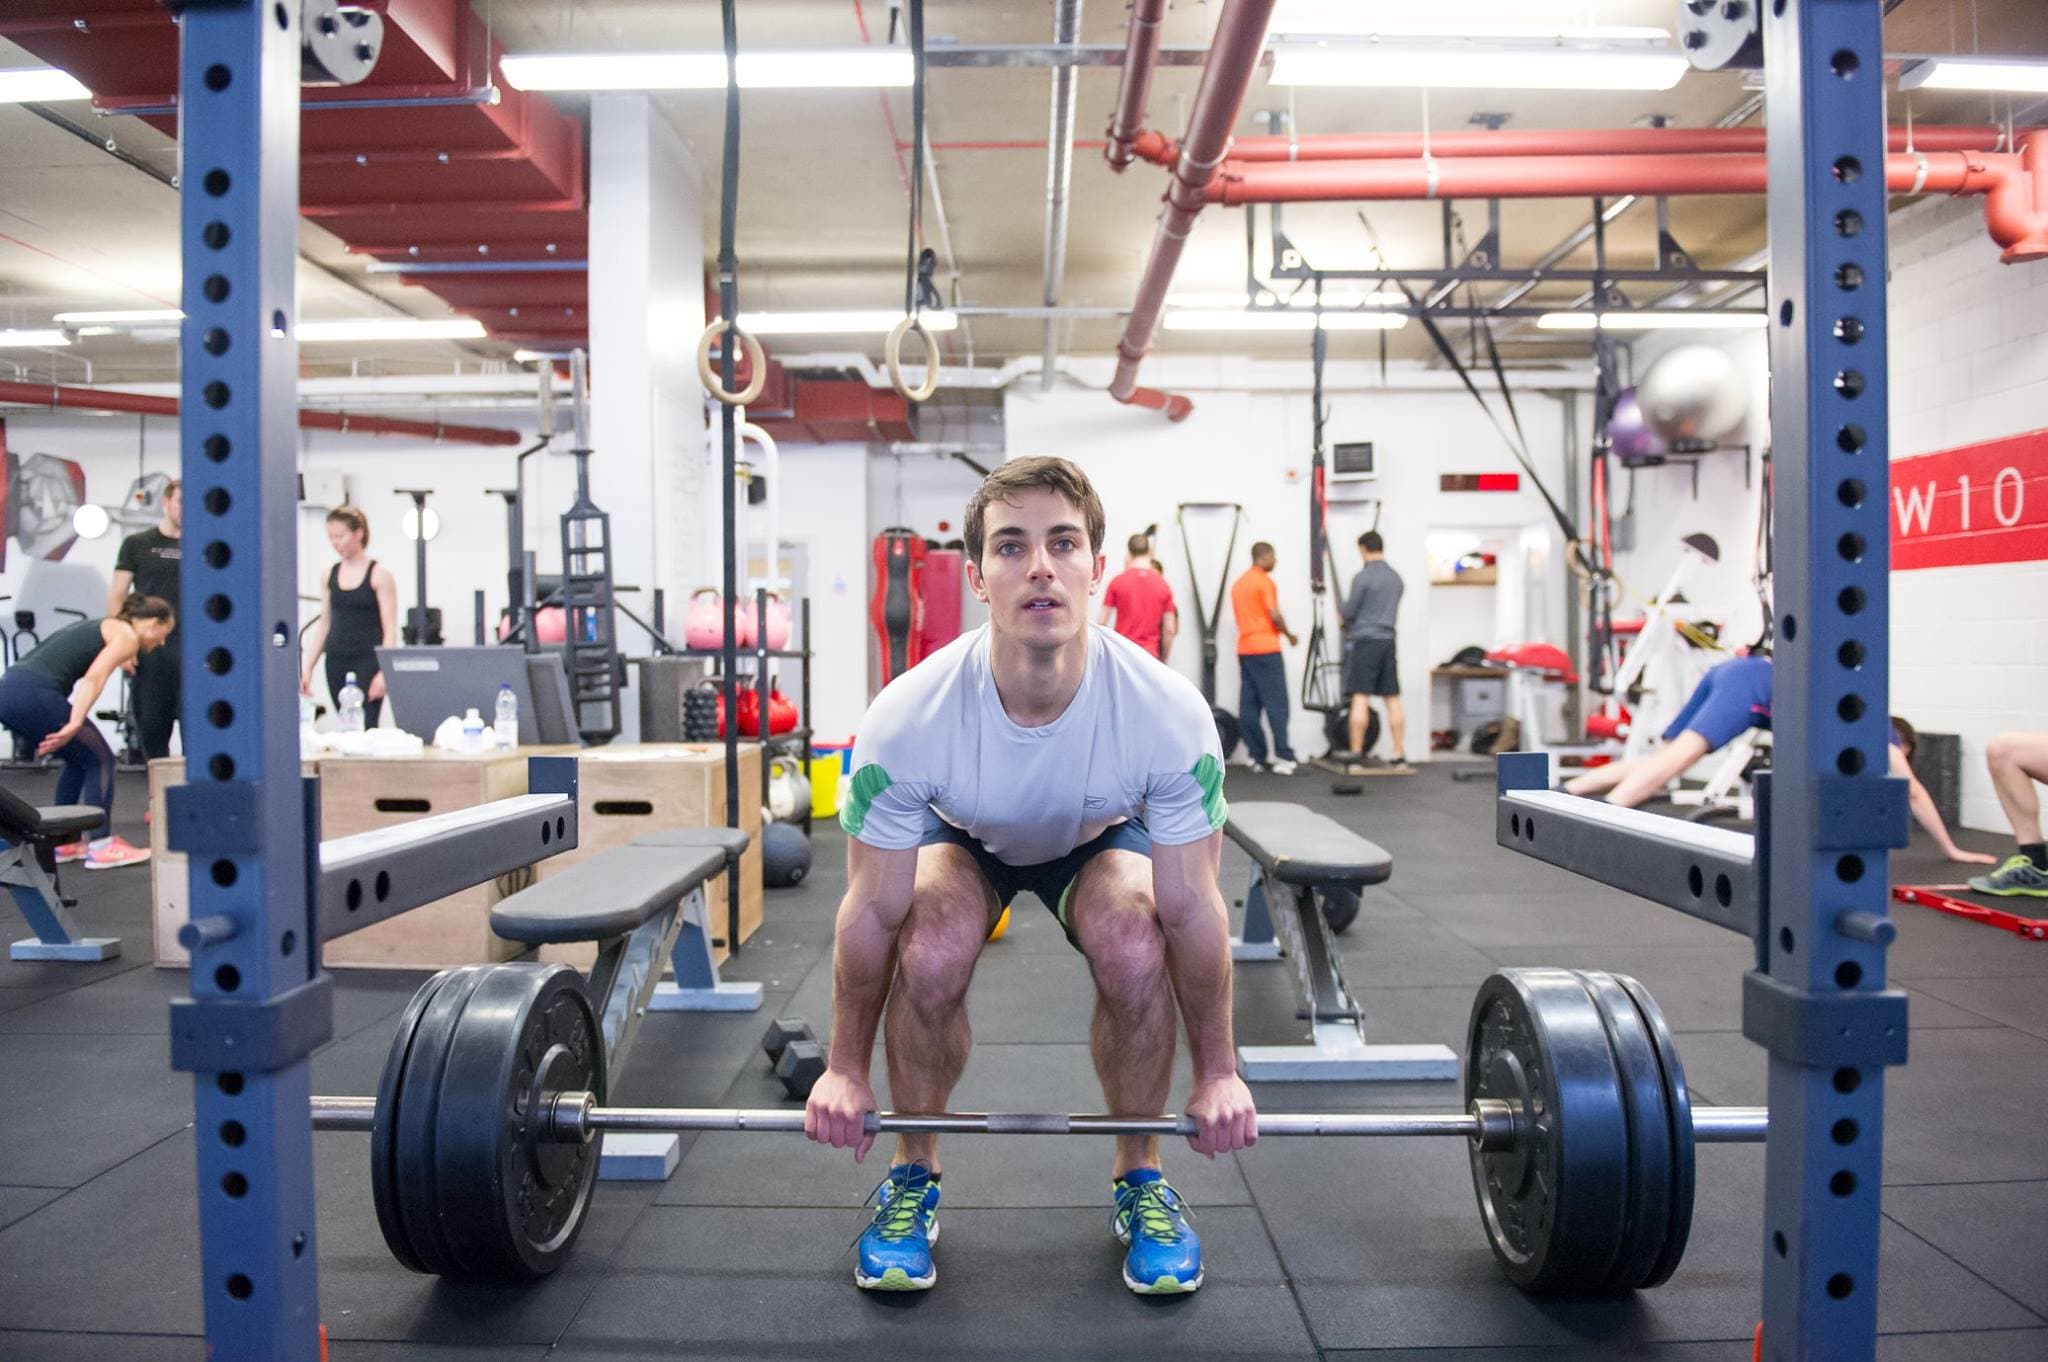 Perfecting the Deadlift - W10 Personal Training Gym